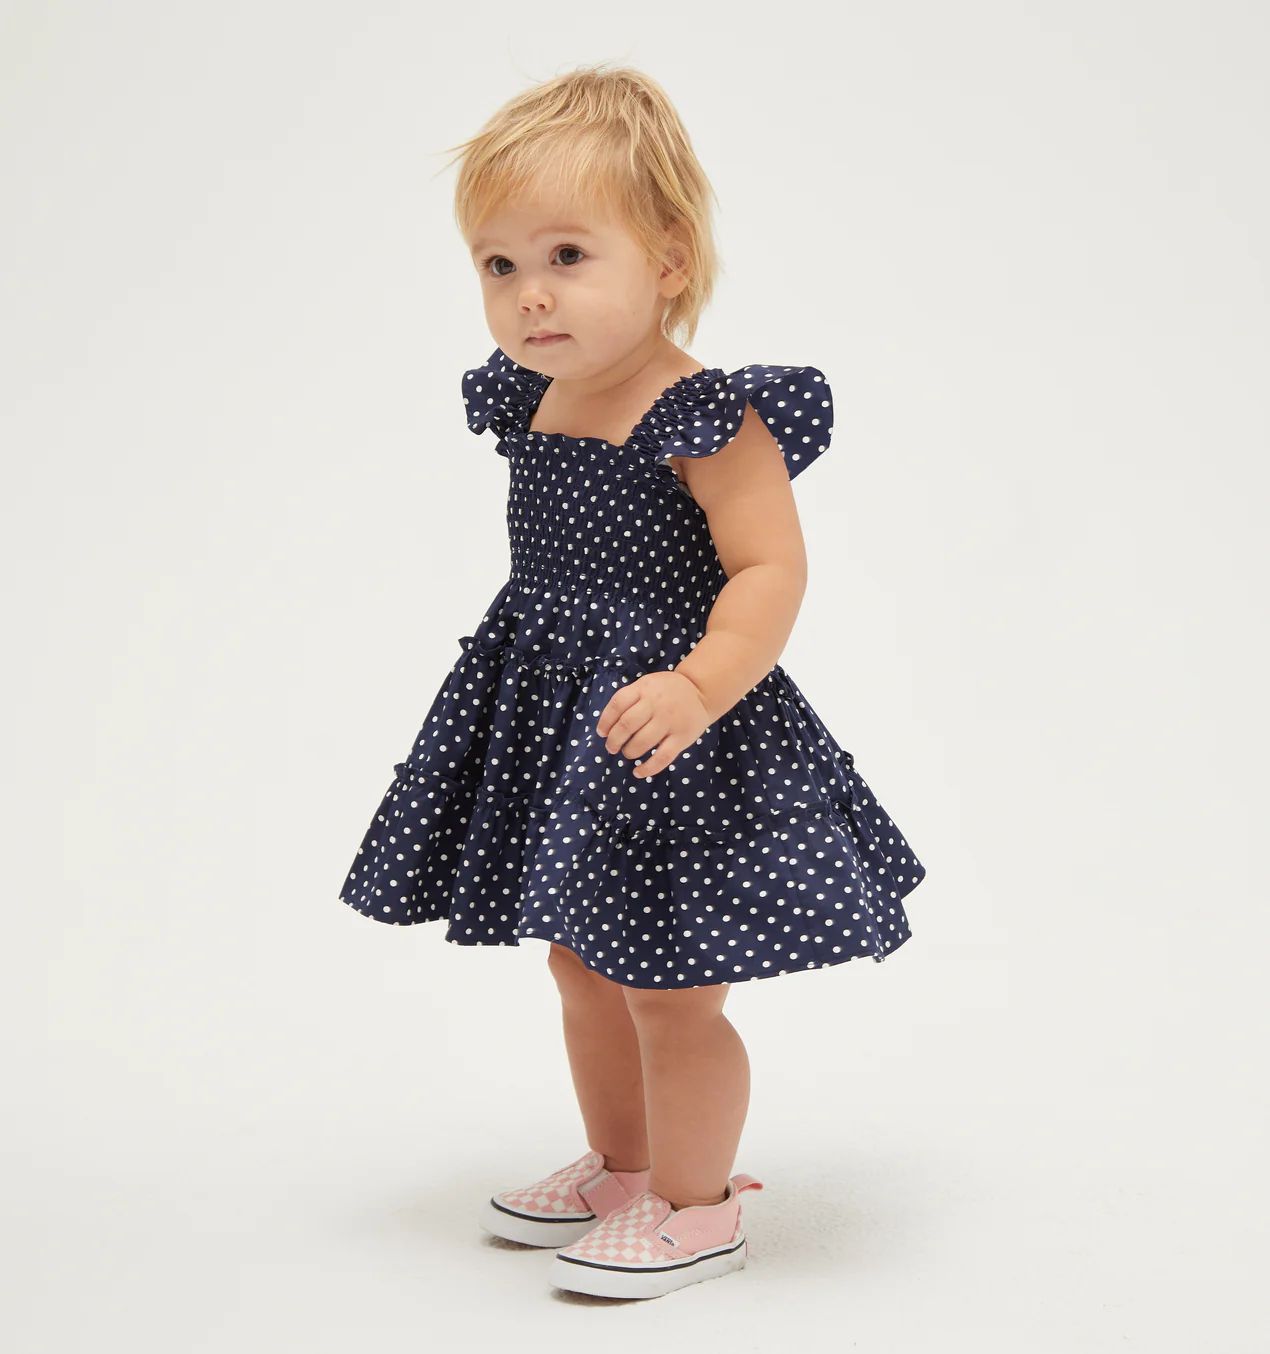 The Baby Ellie Nap Dress - Navy Polka Dot Cotton Sateen | Hill House Home